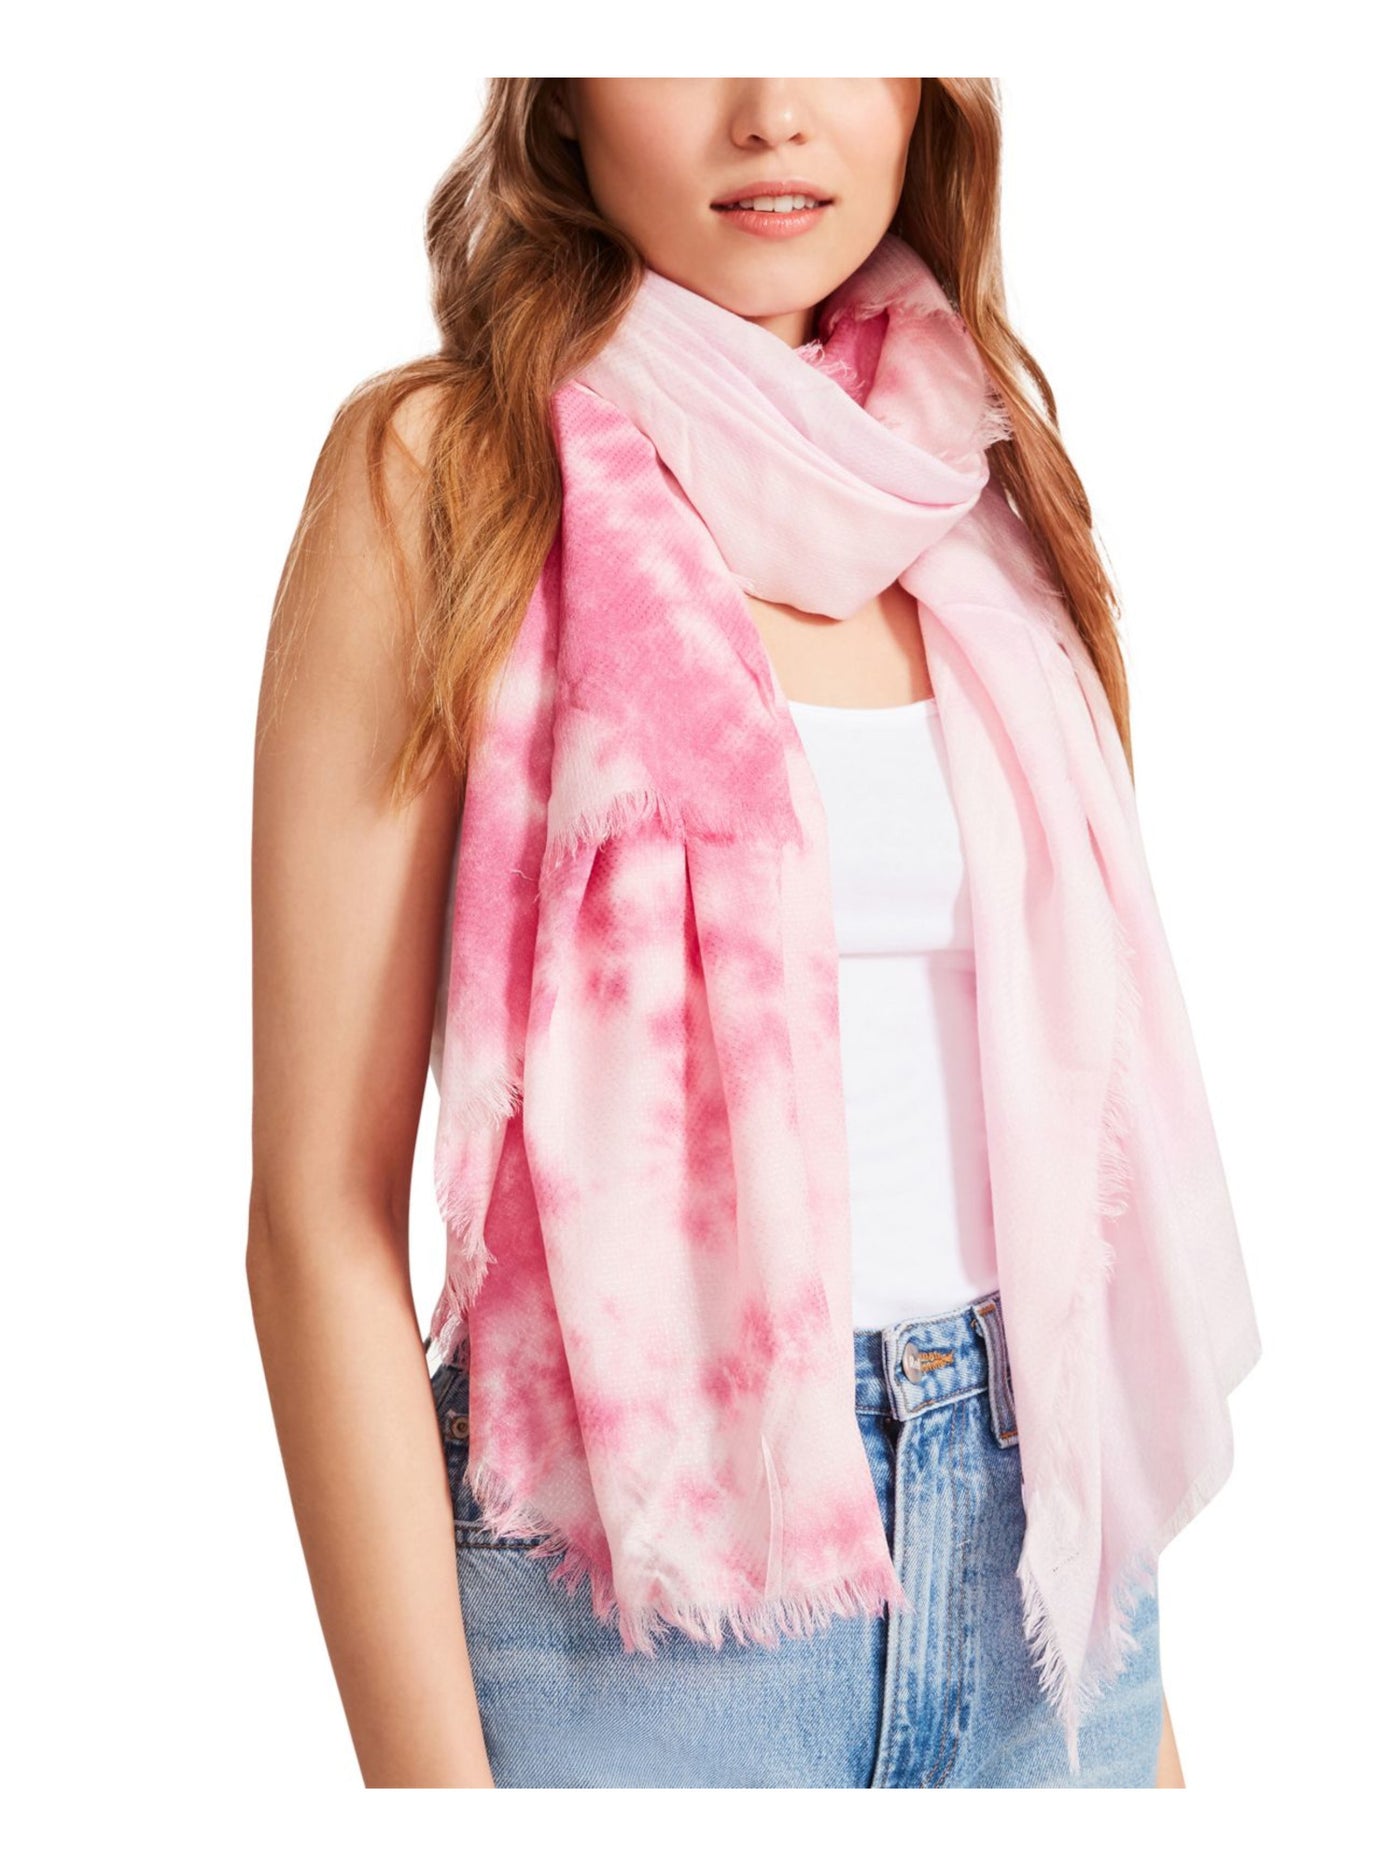 STEVE MADDEN Womens Pink Frayed Cover-Up Sarong Lightweight Scarf